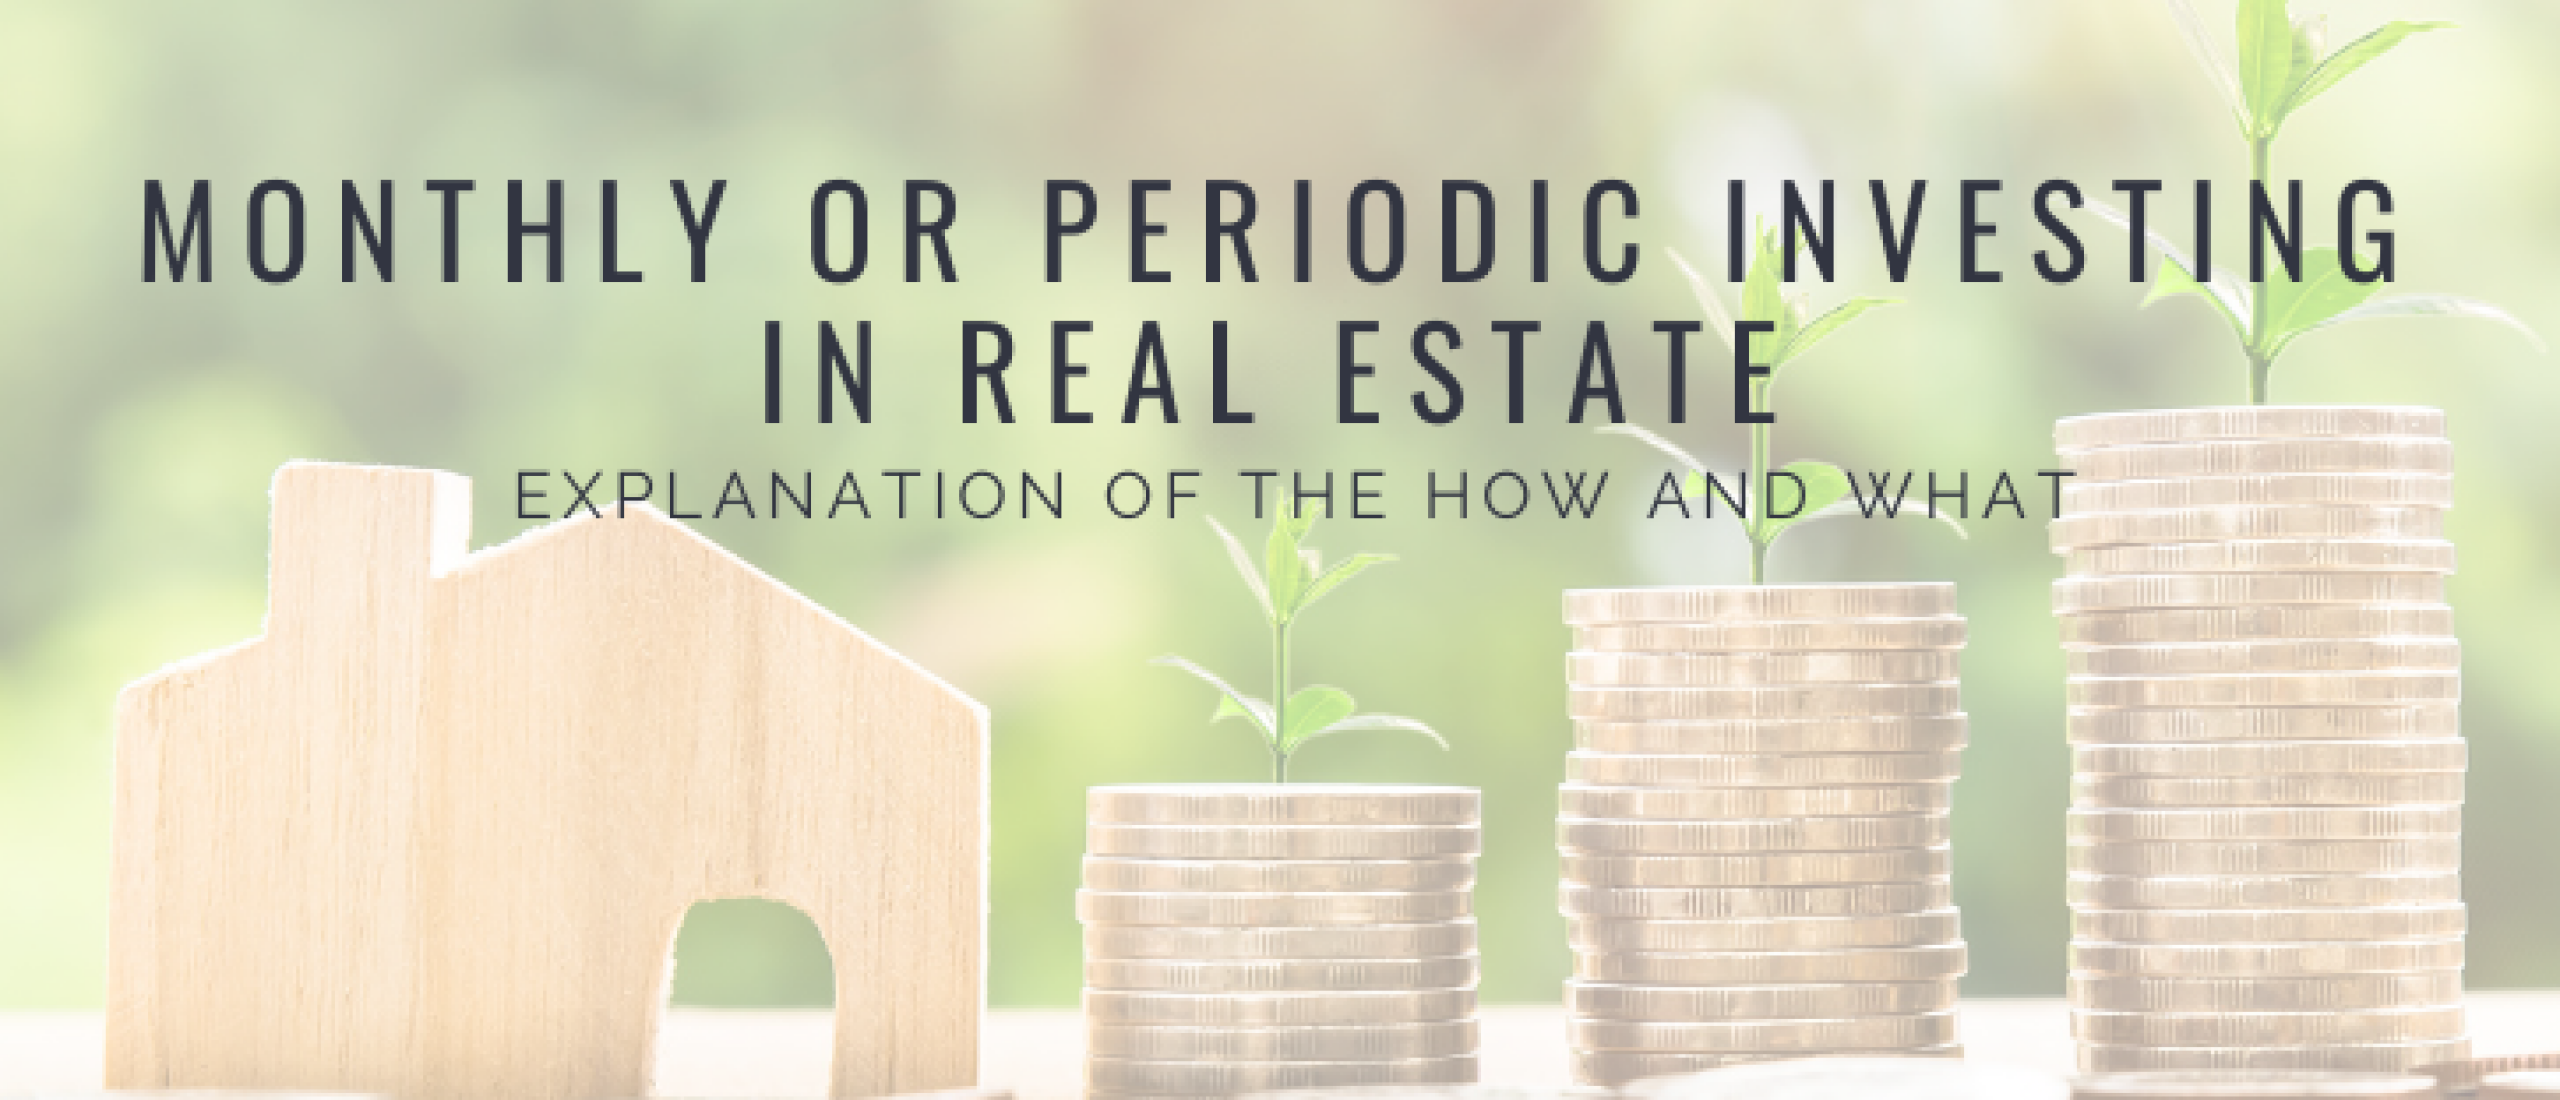 Monthly or Periodic Investing in Real Estate | Happy Investors